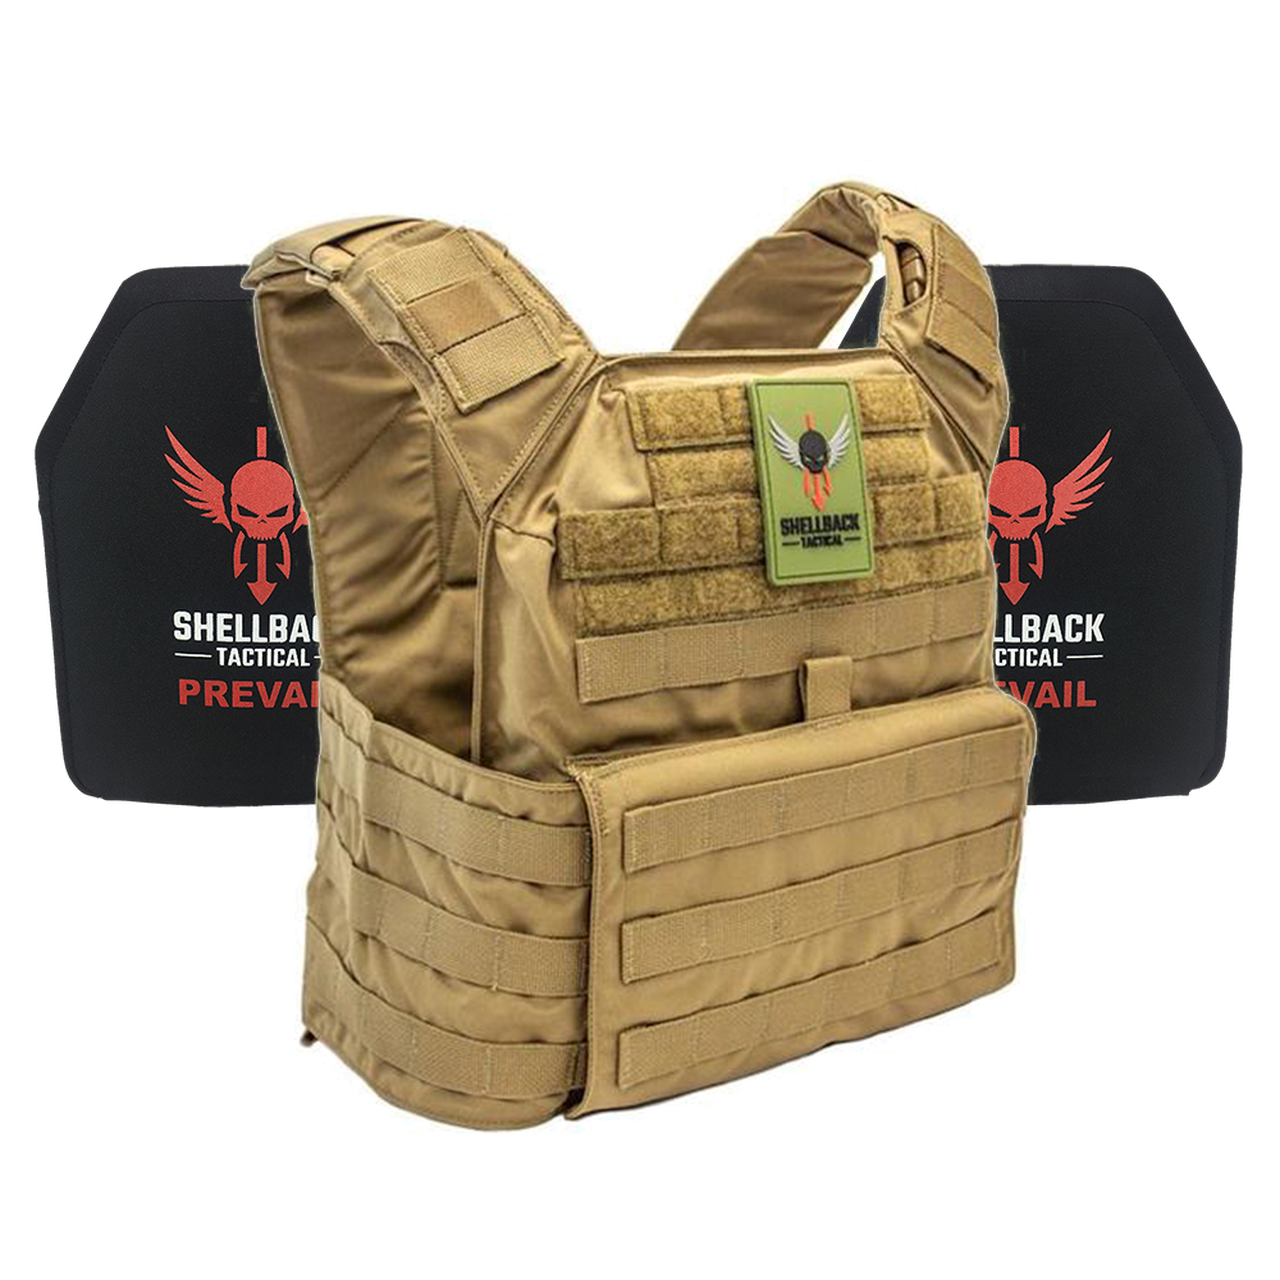 A Shellback Tactical Banshee Active Shooter Kit with Level III Single Curve 10 x 12 Hard Armor plate carrier with a red and black logo.